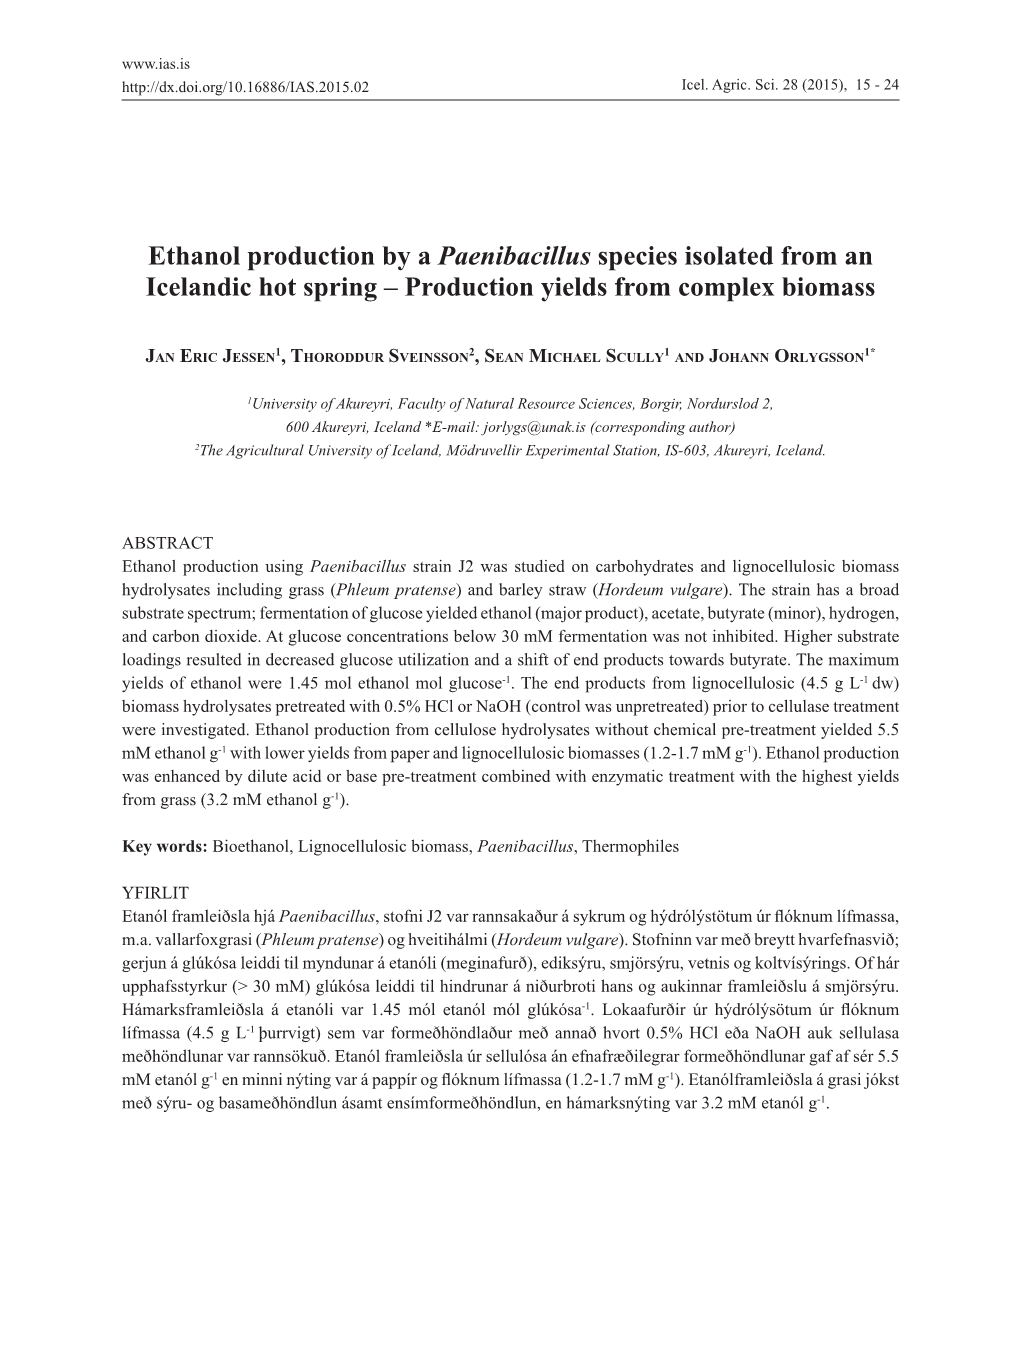 Ethanol Production by a Paenibacillus Species Isolated from an Icelandic Hot Spring – Production Yields from Complex Biomass